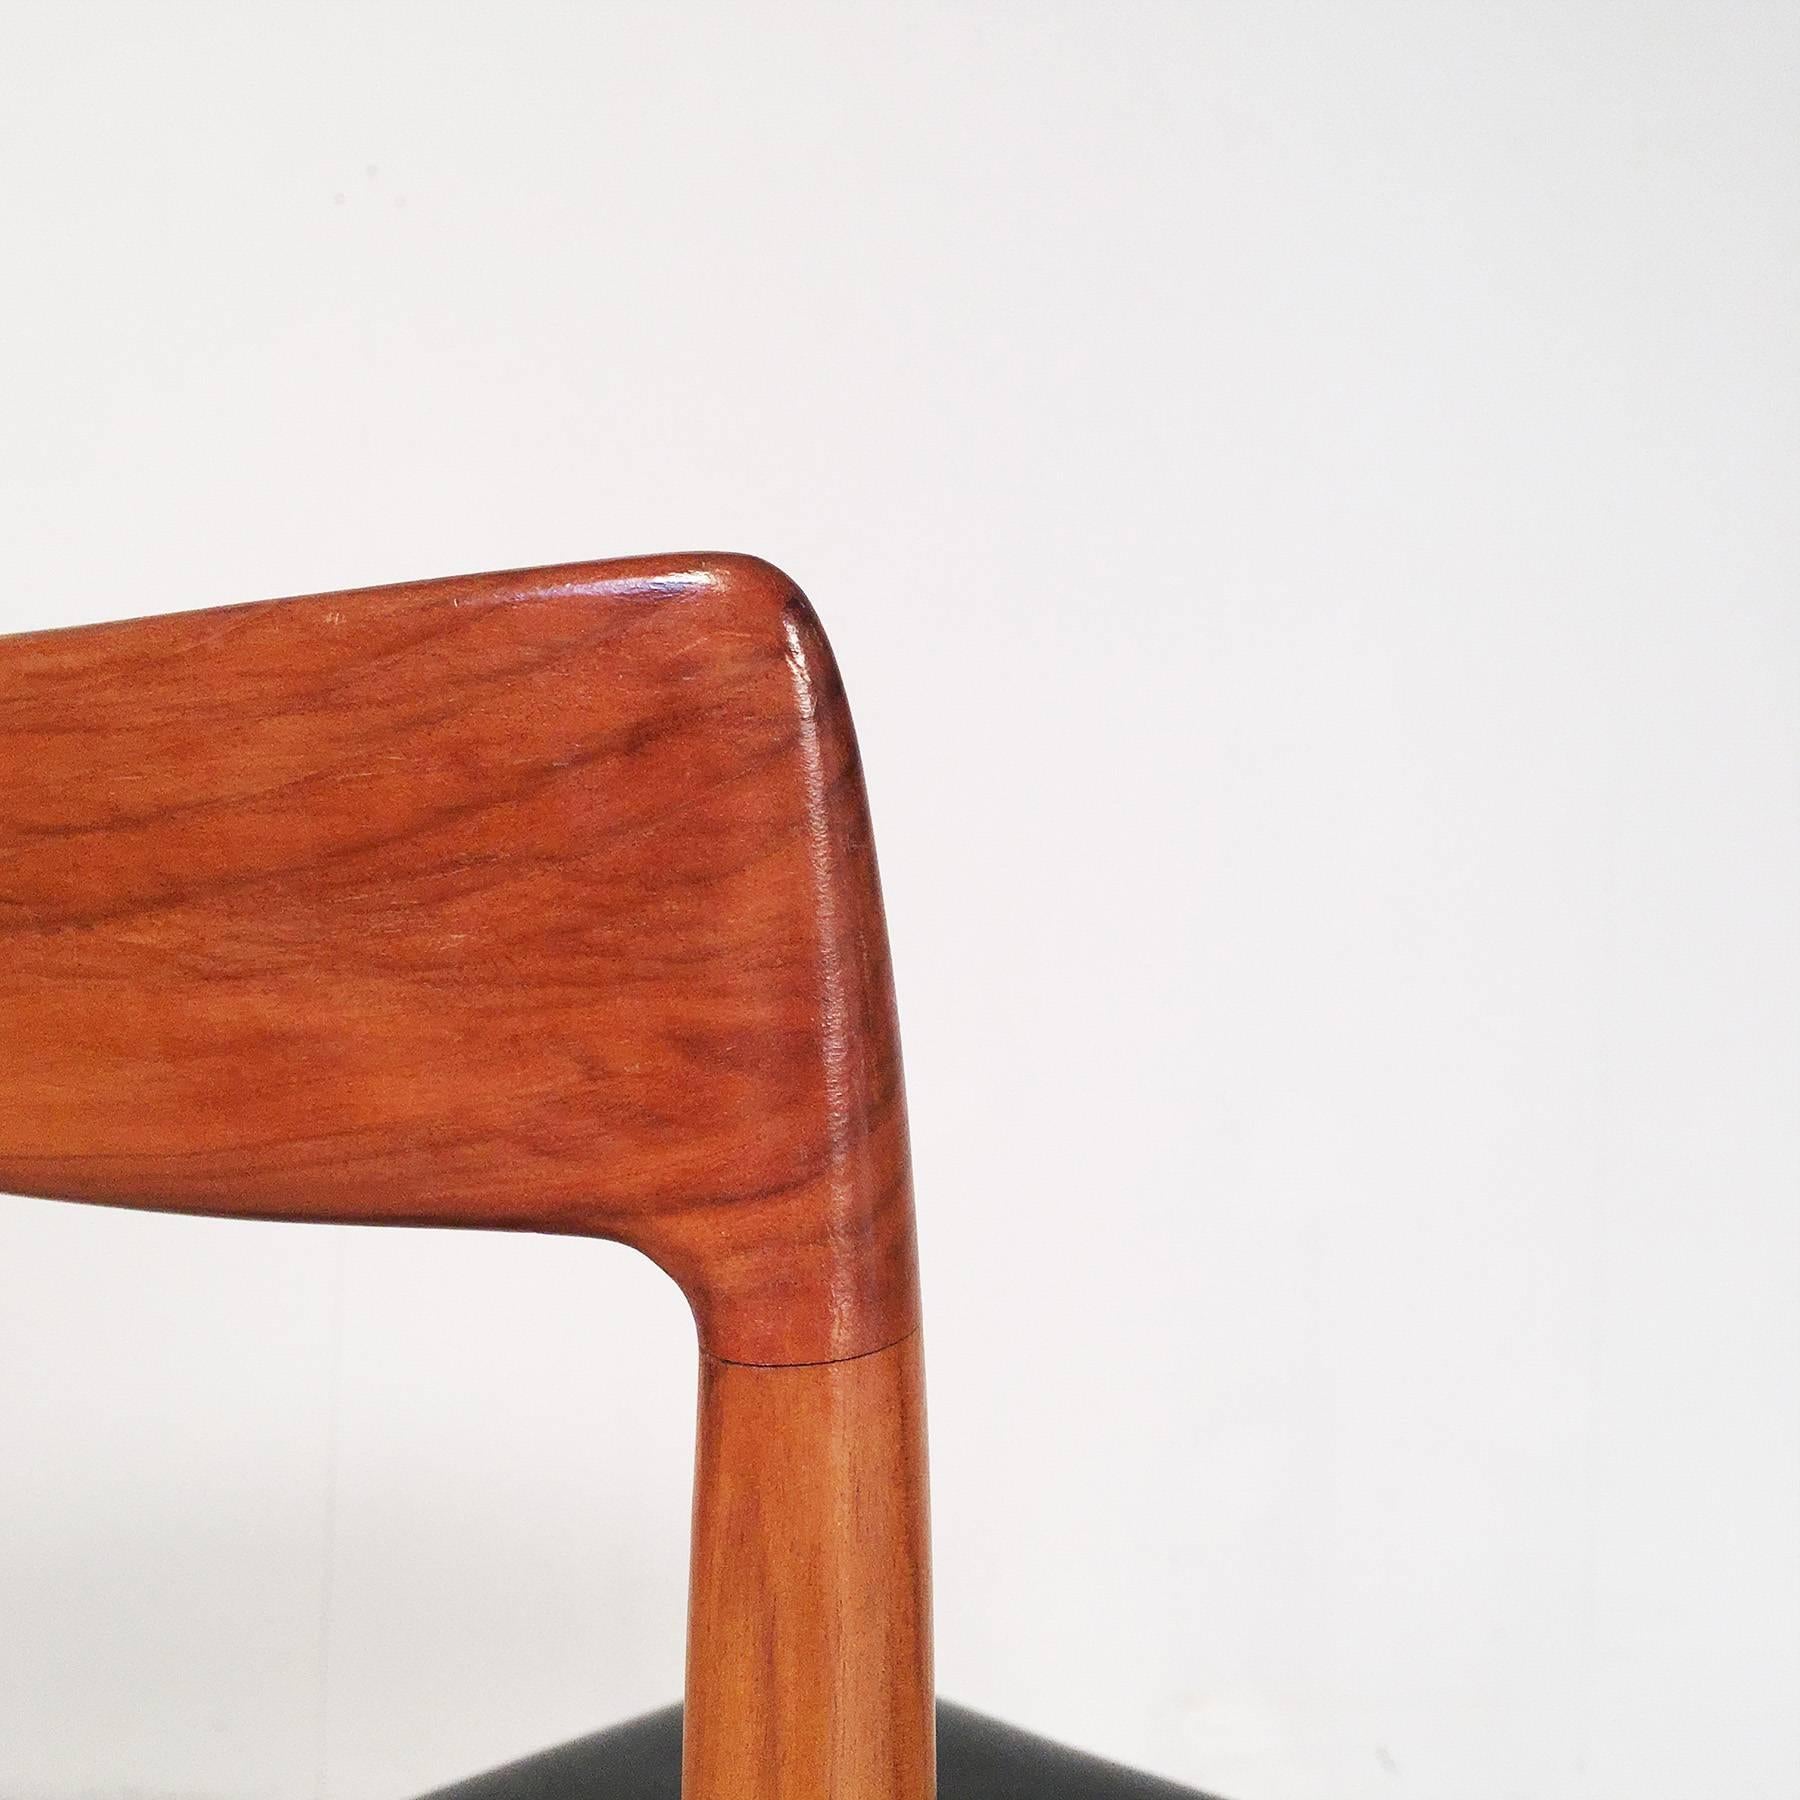 Varnished Six Dining Chairs from the 1960s, Manufactured by Lübke